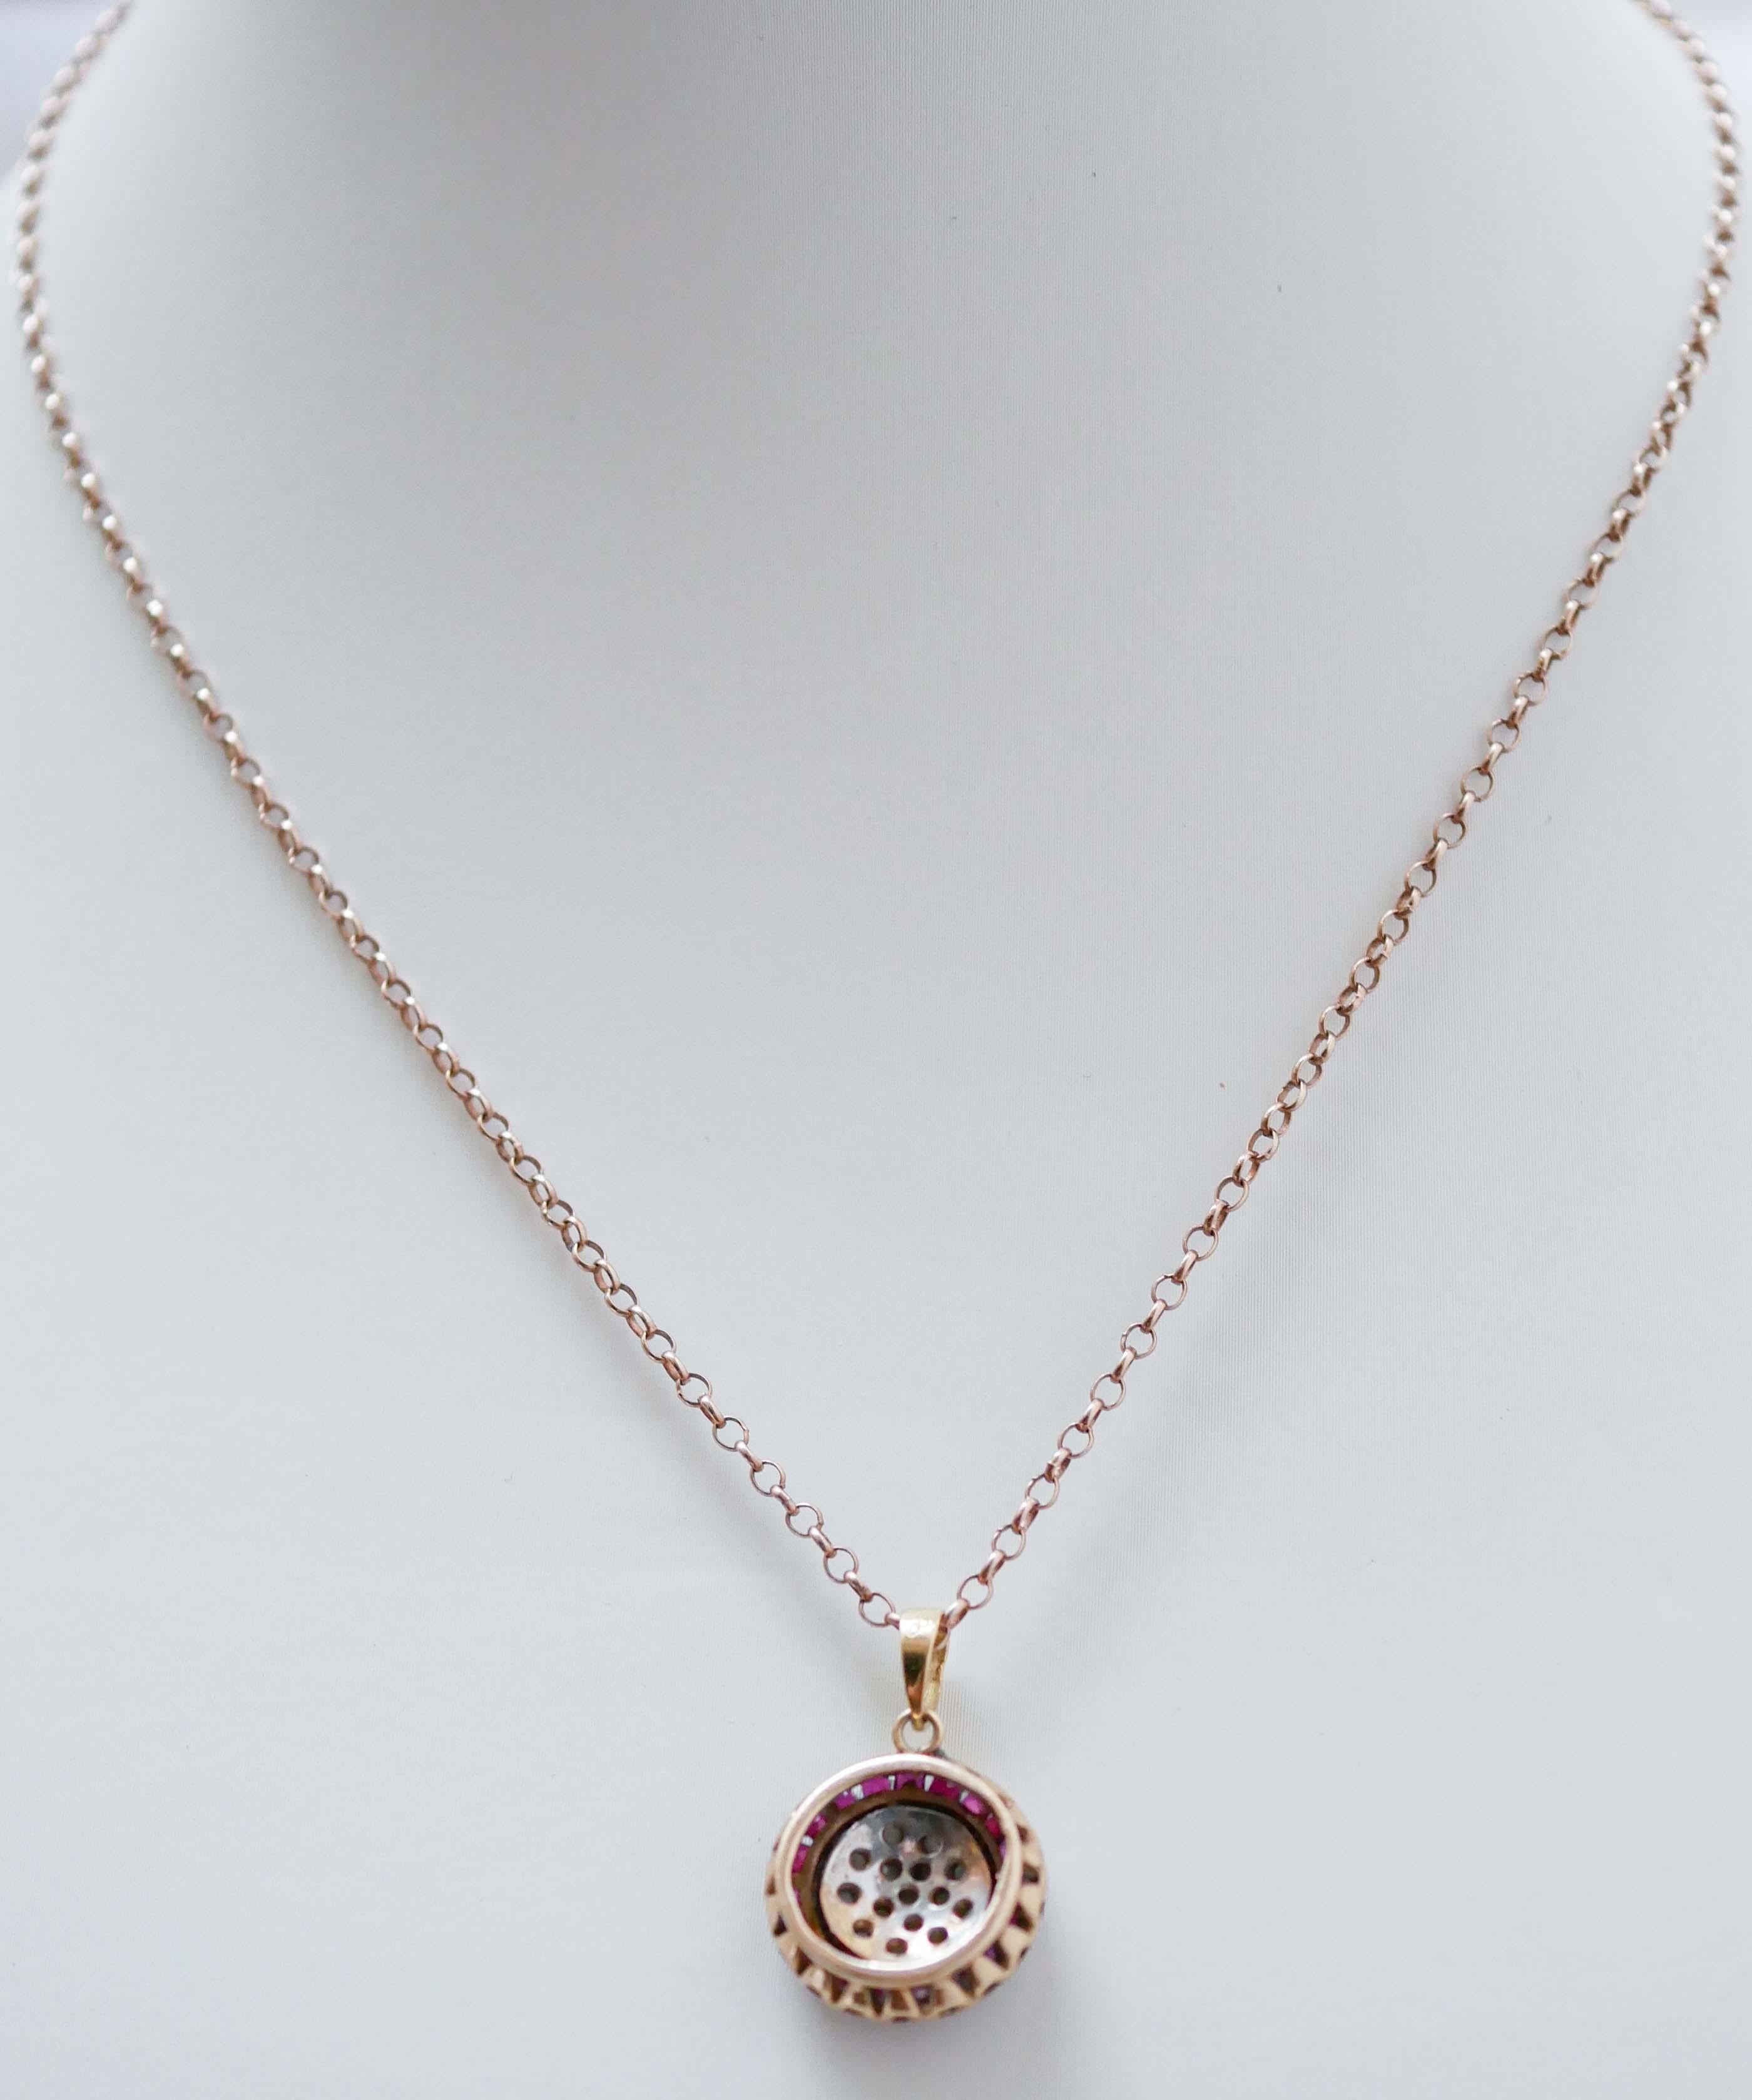 Mixed Cut Rubies, Diamonds, Rose Gold and Silver Pendant Necklace.